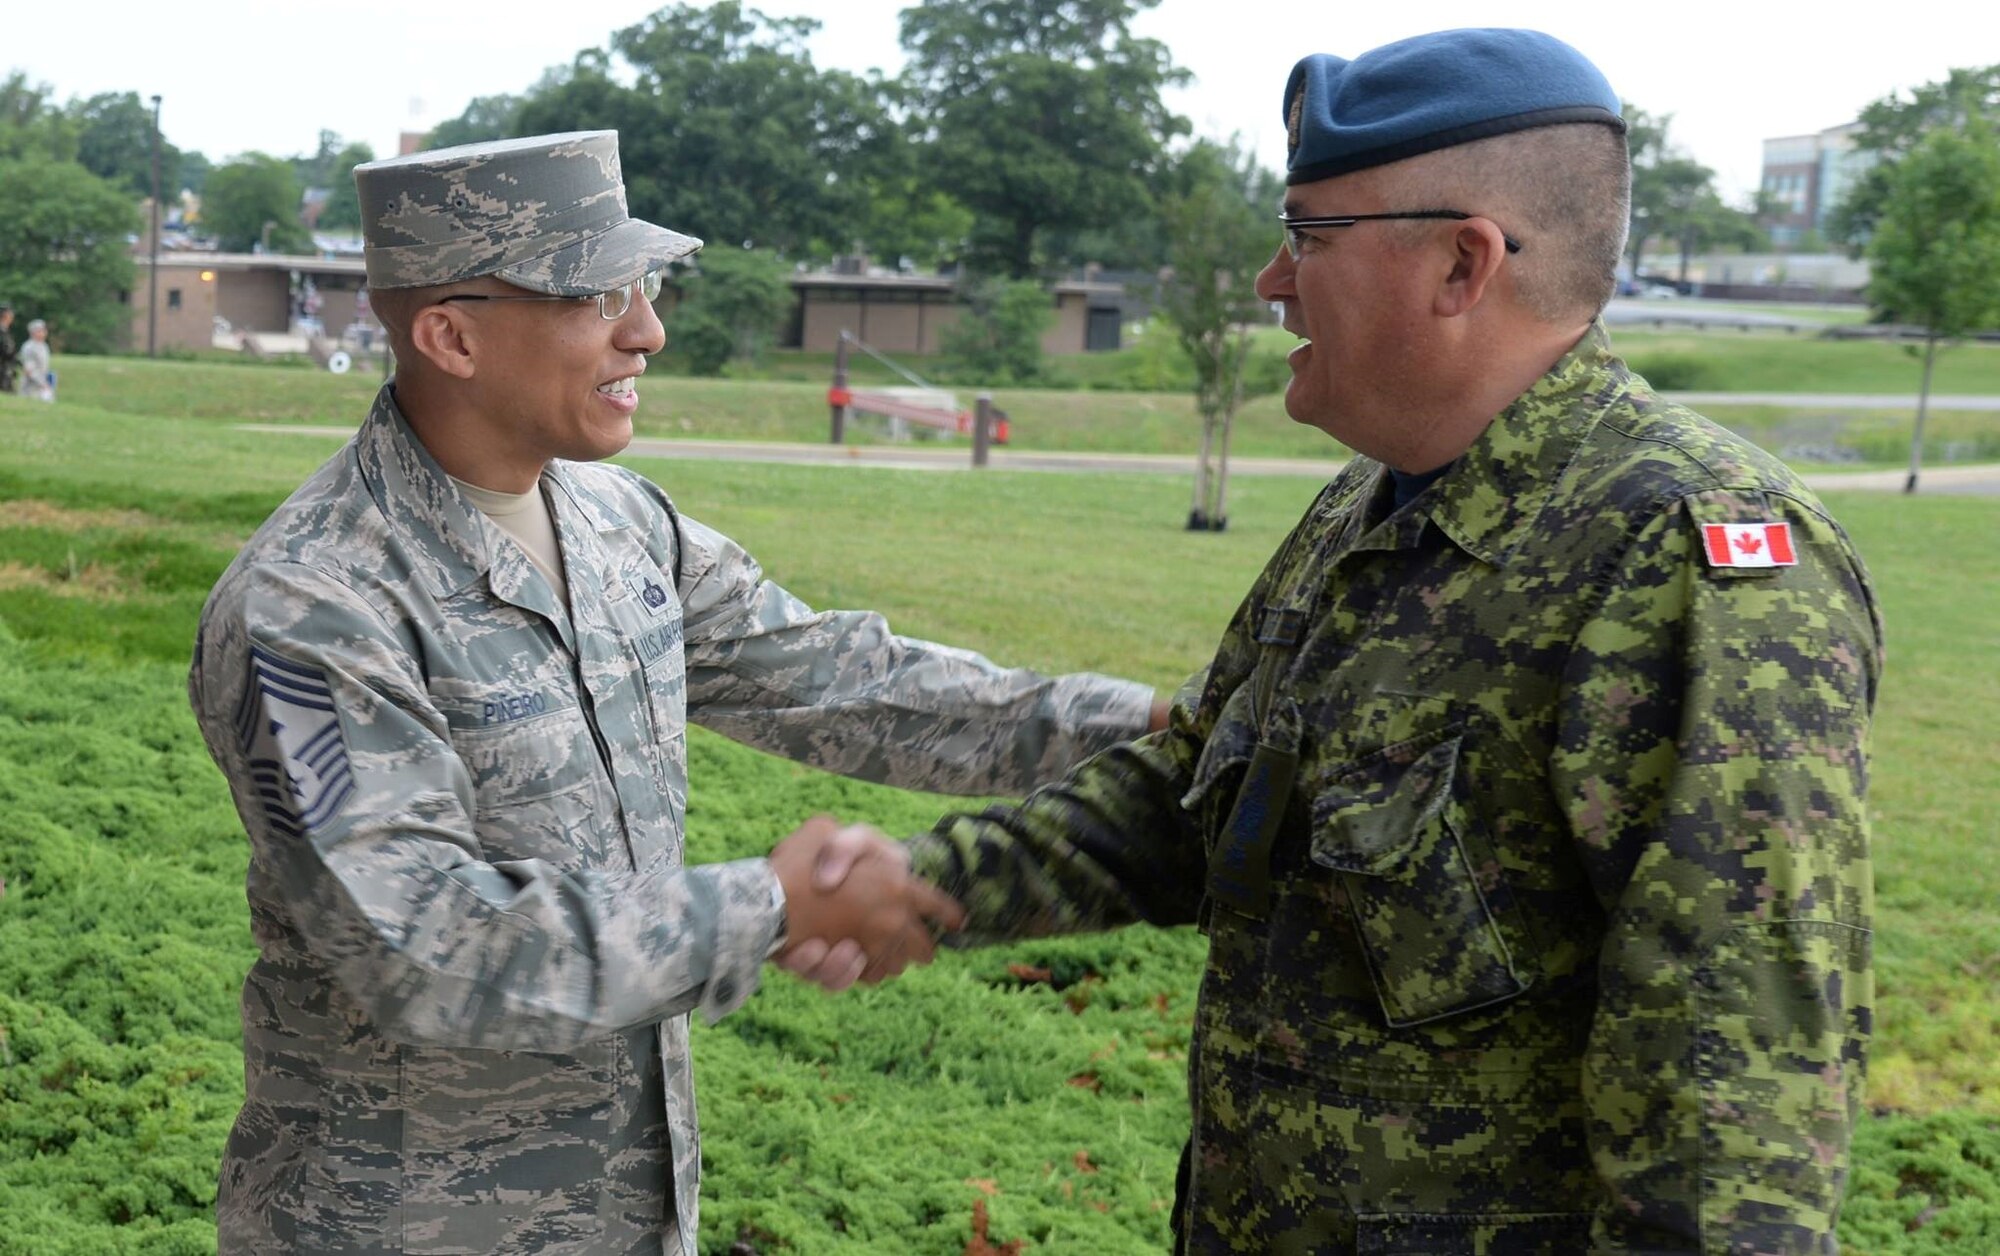 Air Force District of Washington First Sergeant Chief Master Sgt. Manny Pineiro greets Canadian Air Force Chief Warrant Officer Pierrot Jetté as he arrives at the Senior Enlisted Leader International Summit (SELIS) on Joint Base Andrews, Md., July 13, 2016. The SELIS is a forum of international senior enlisted leaders hosted by Chief Master Sergeant of the Air Force James A. Cody. (U.S. Air Force photo/ Tech. Sgt. Matt Davis)